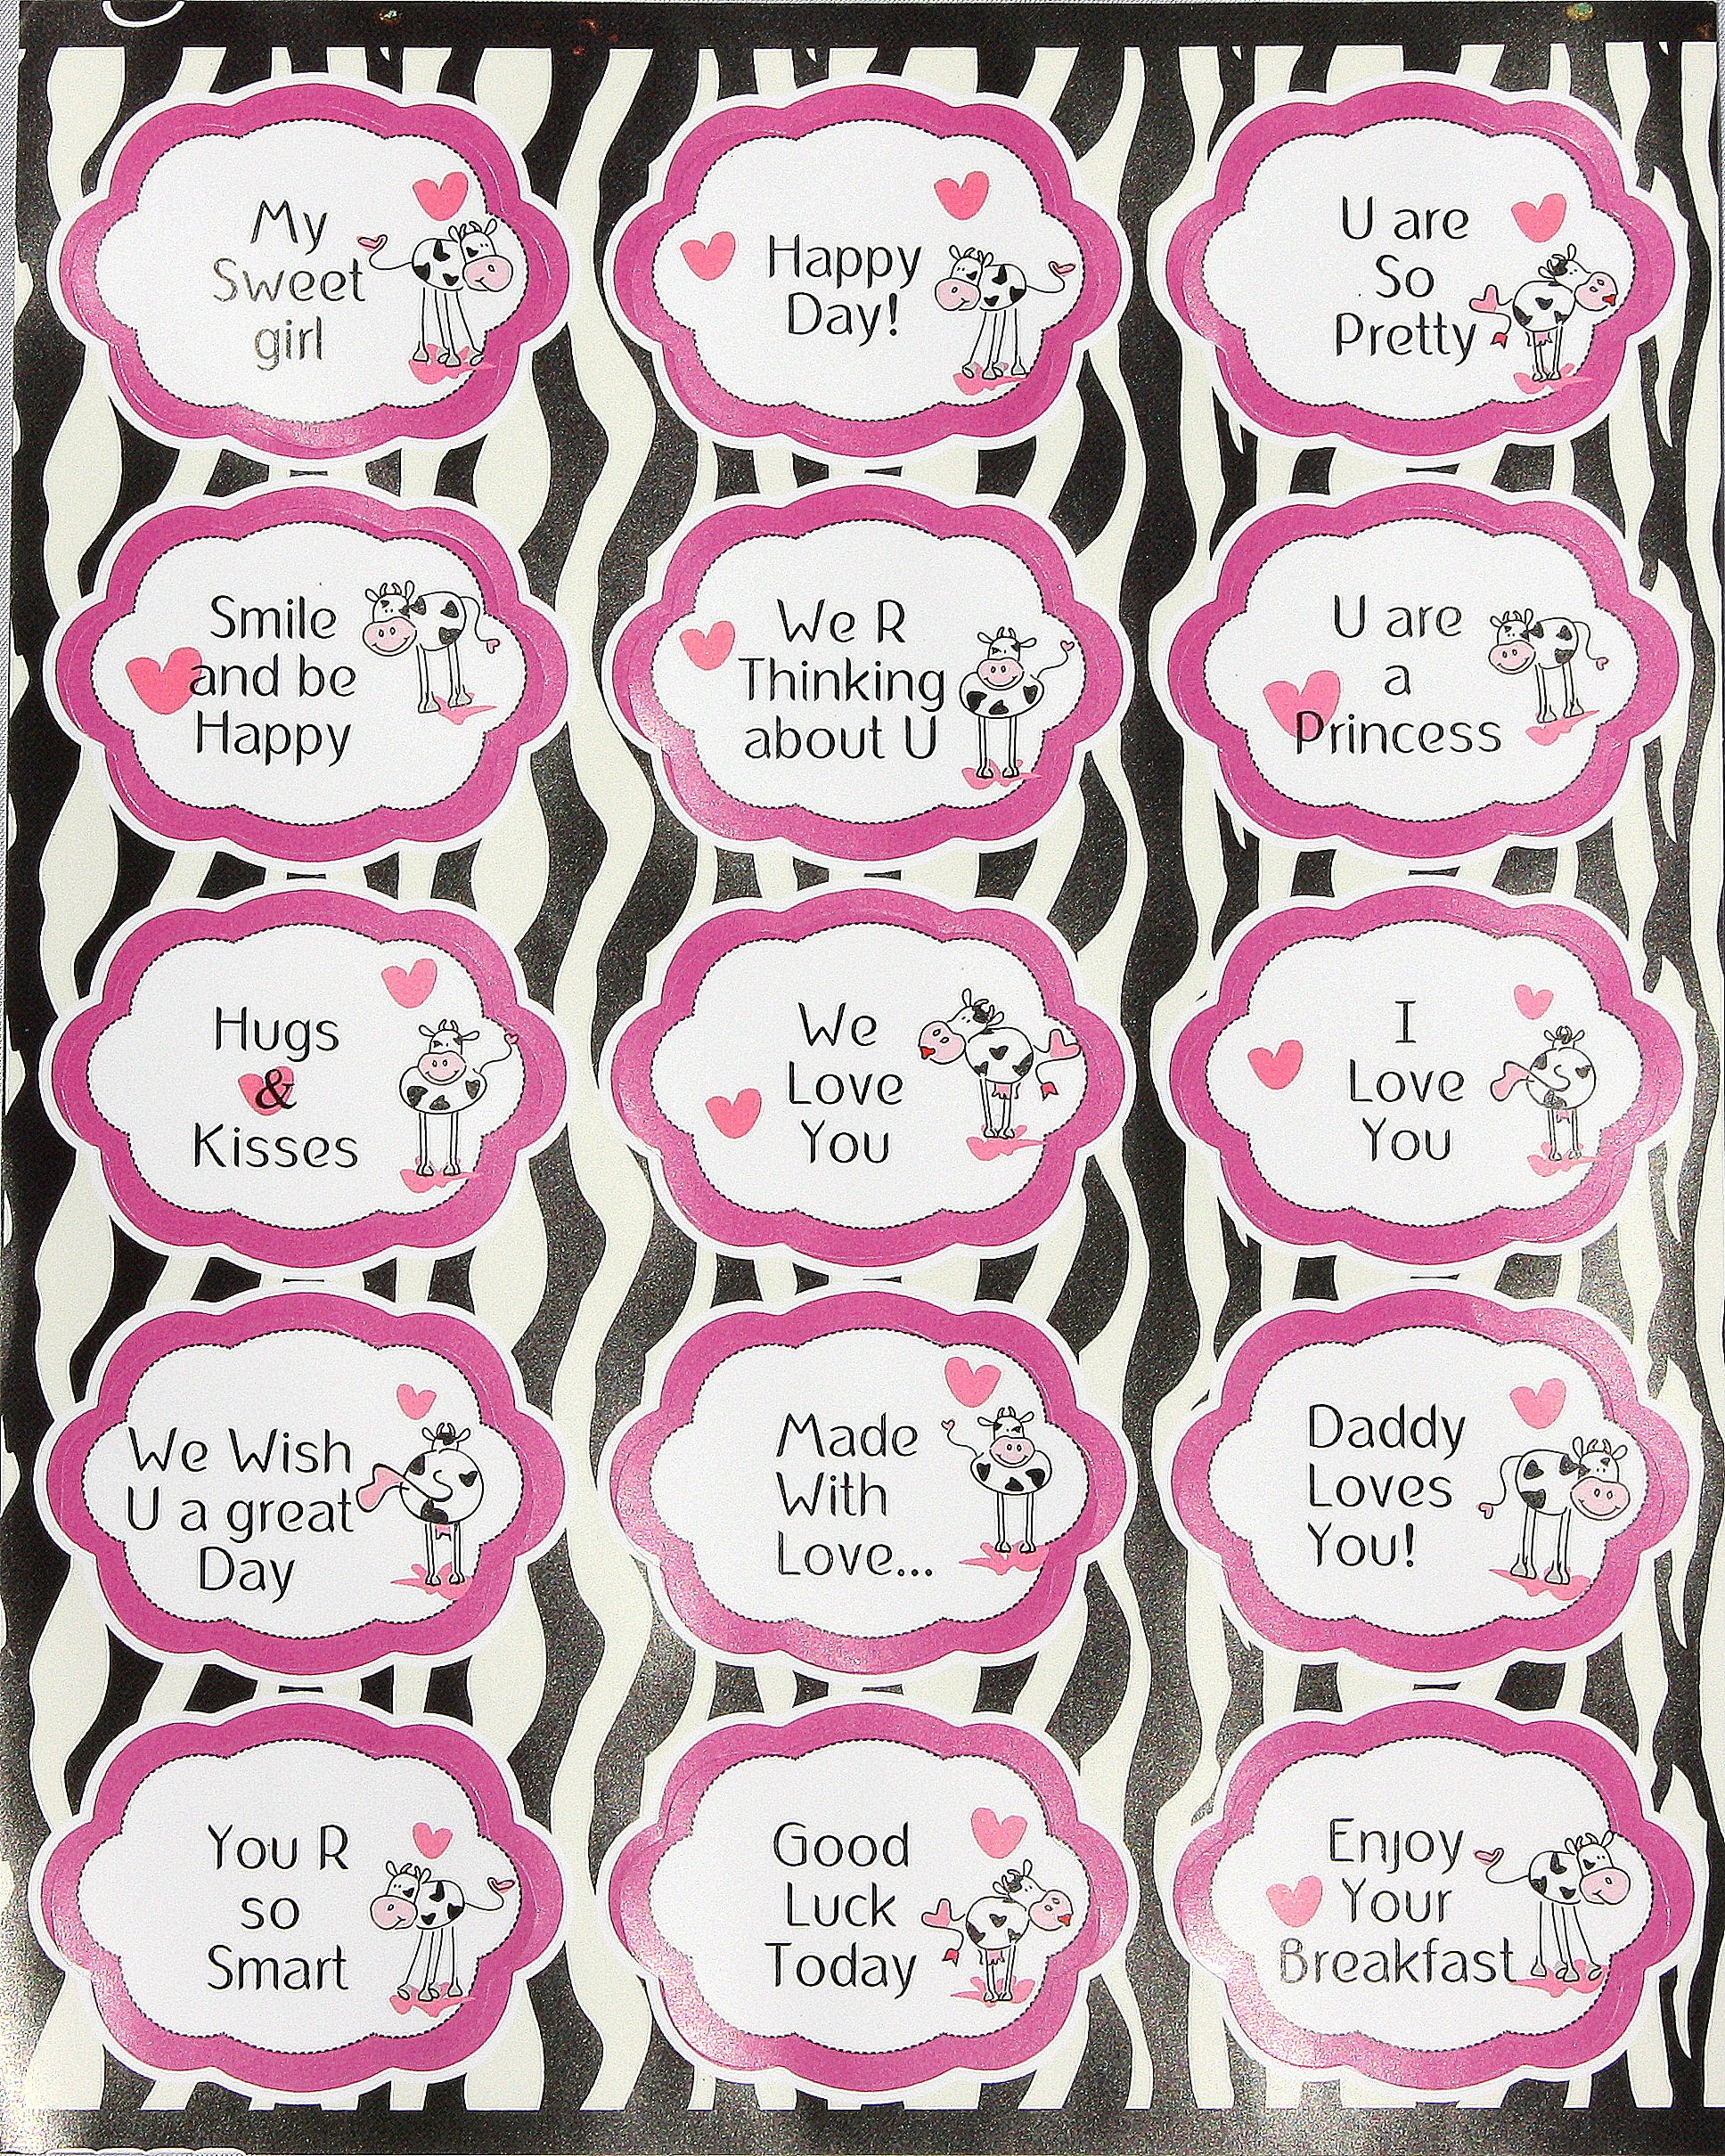 Cute Motivational Stickers for Kids - 30 Pack – Royal Green Market